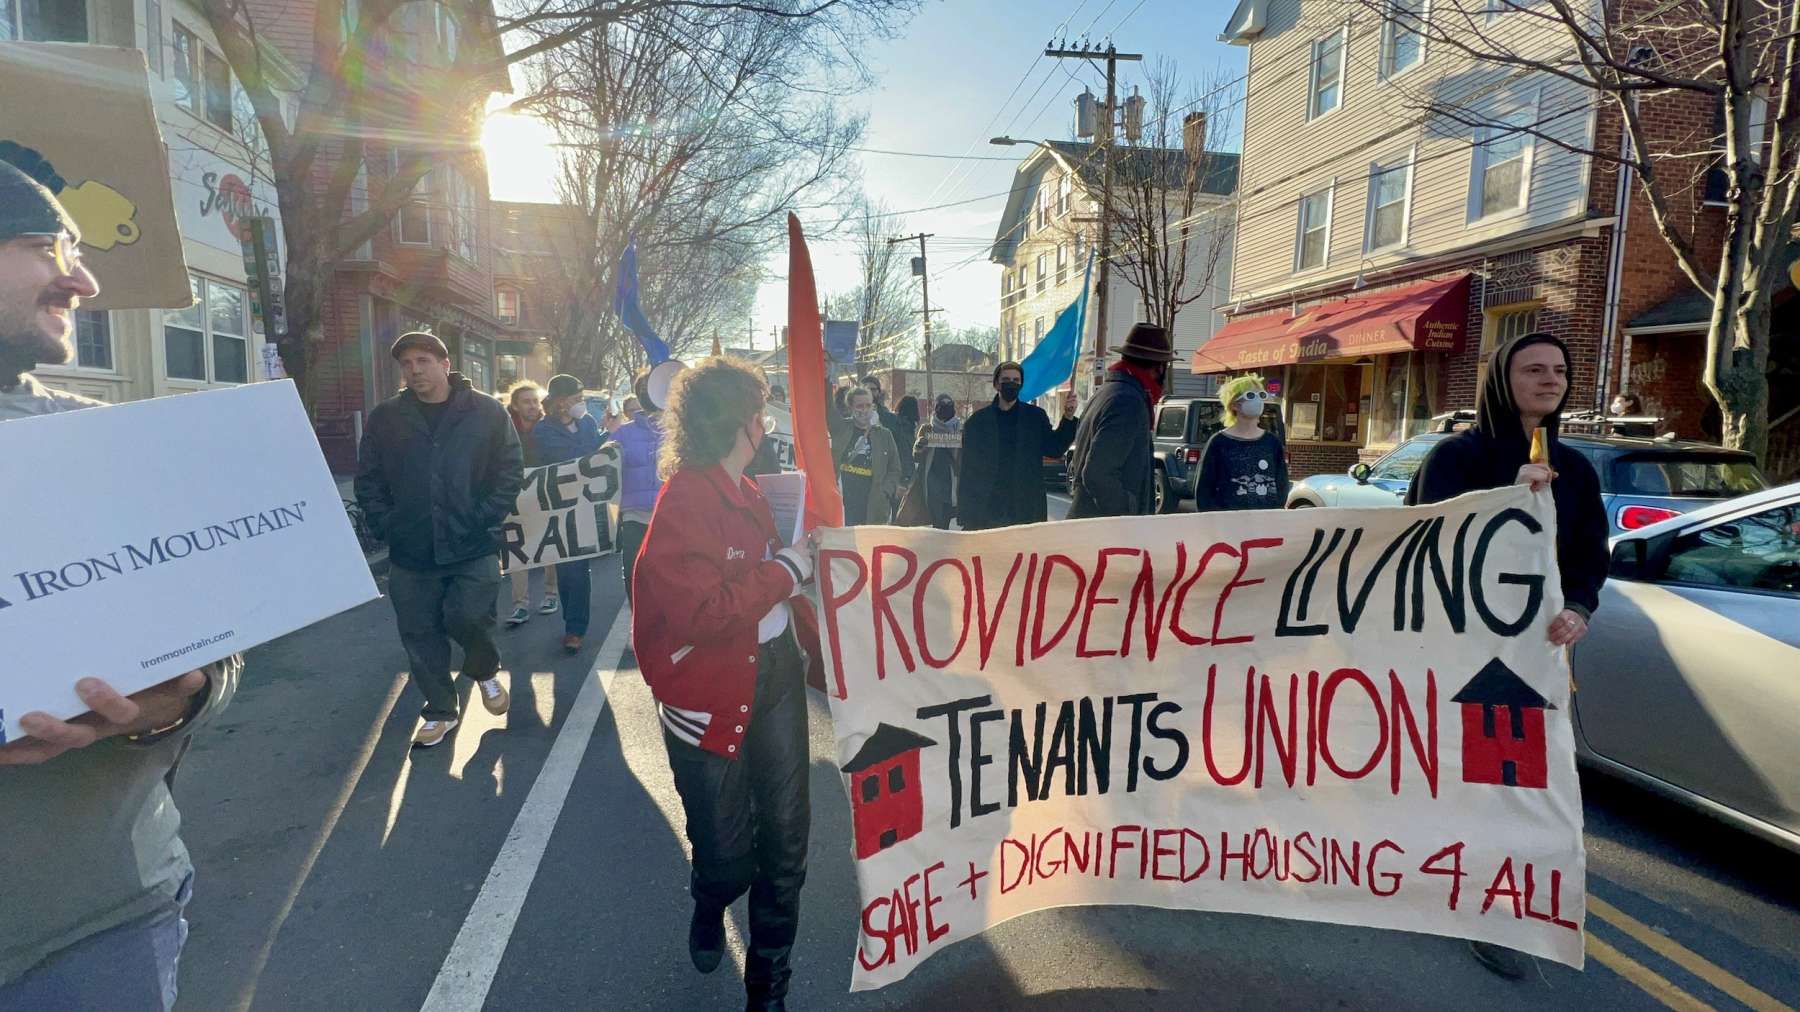 Rhode Island News: Mushrooms sprouting from the ceiling: Providence Living Tenants Union protests their unhealthy apartments